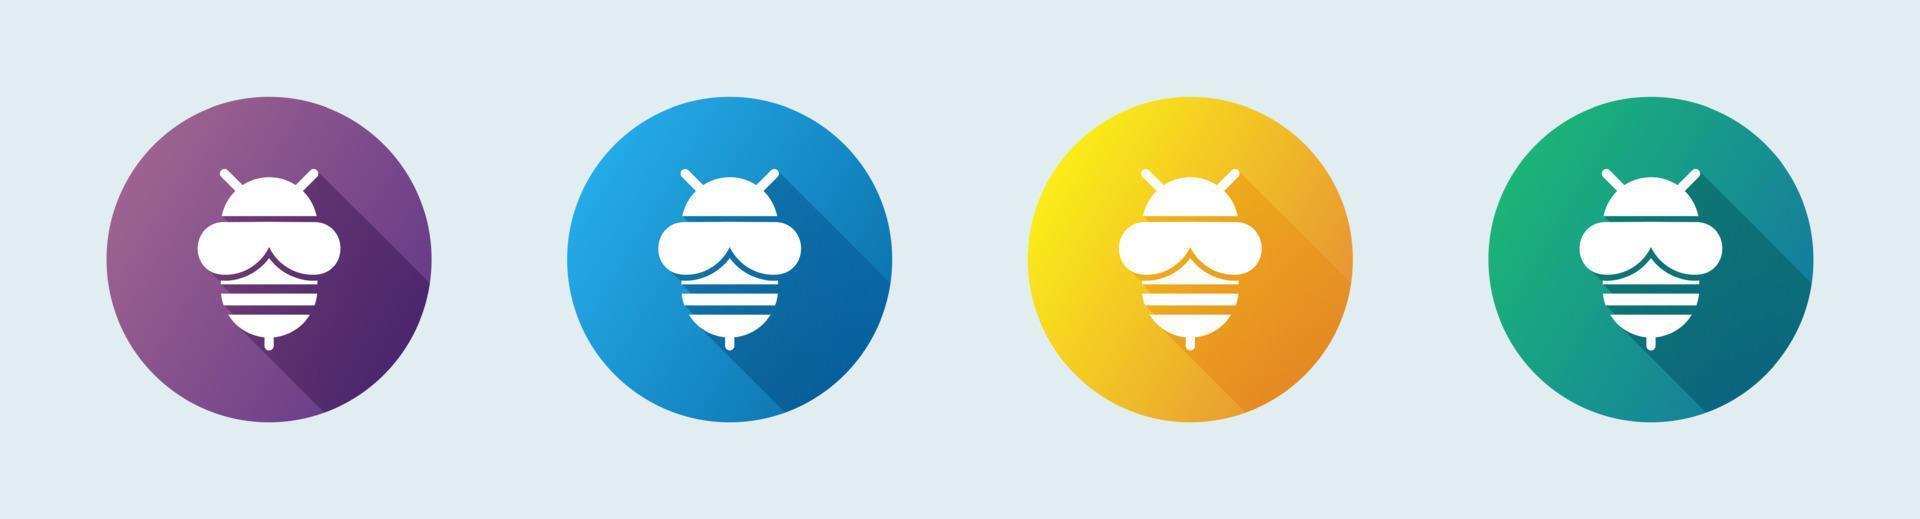 Bee solid icon in flat design style. Honey signs vector illustration.